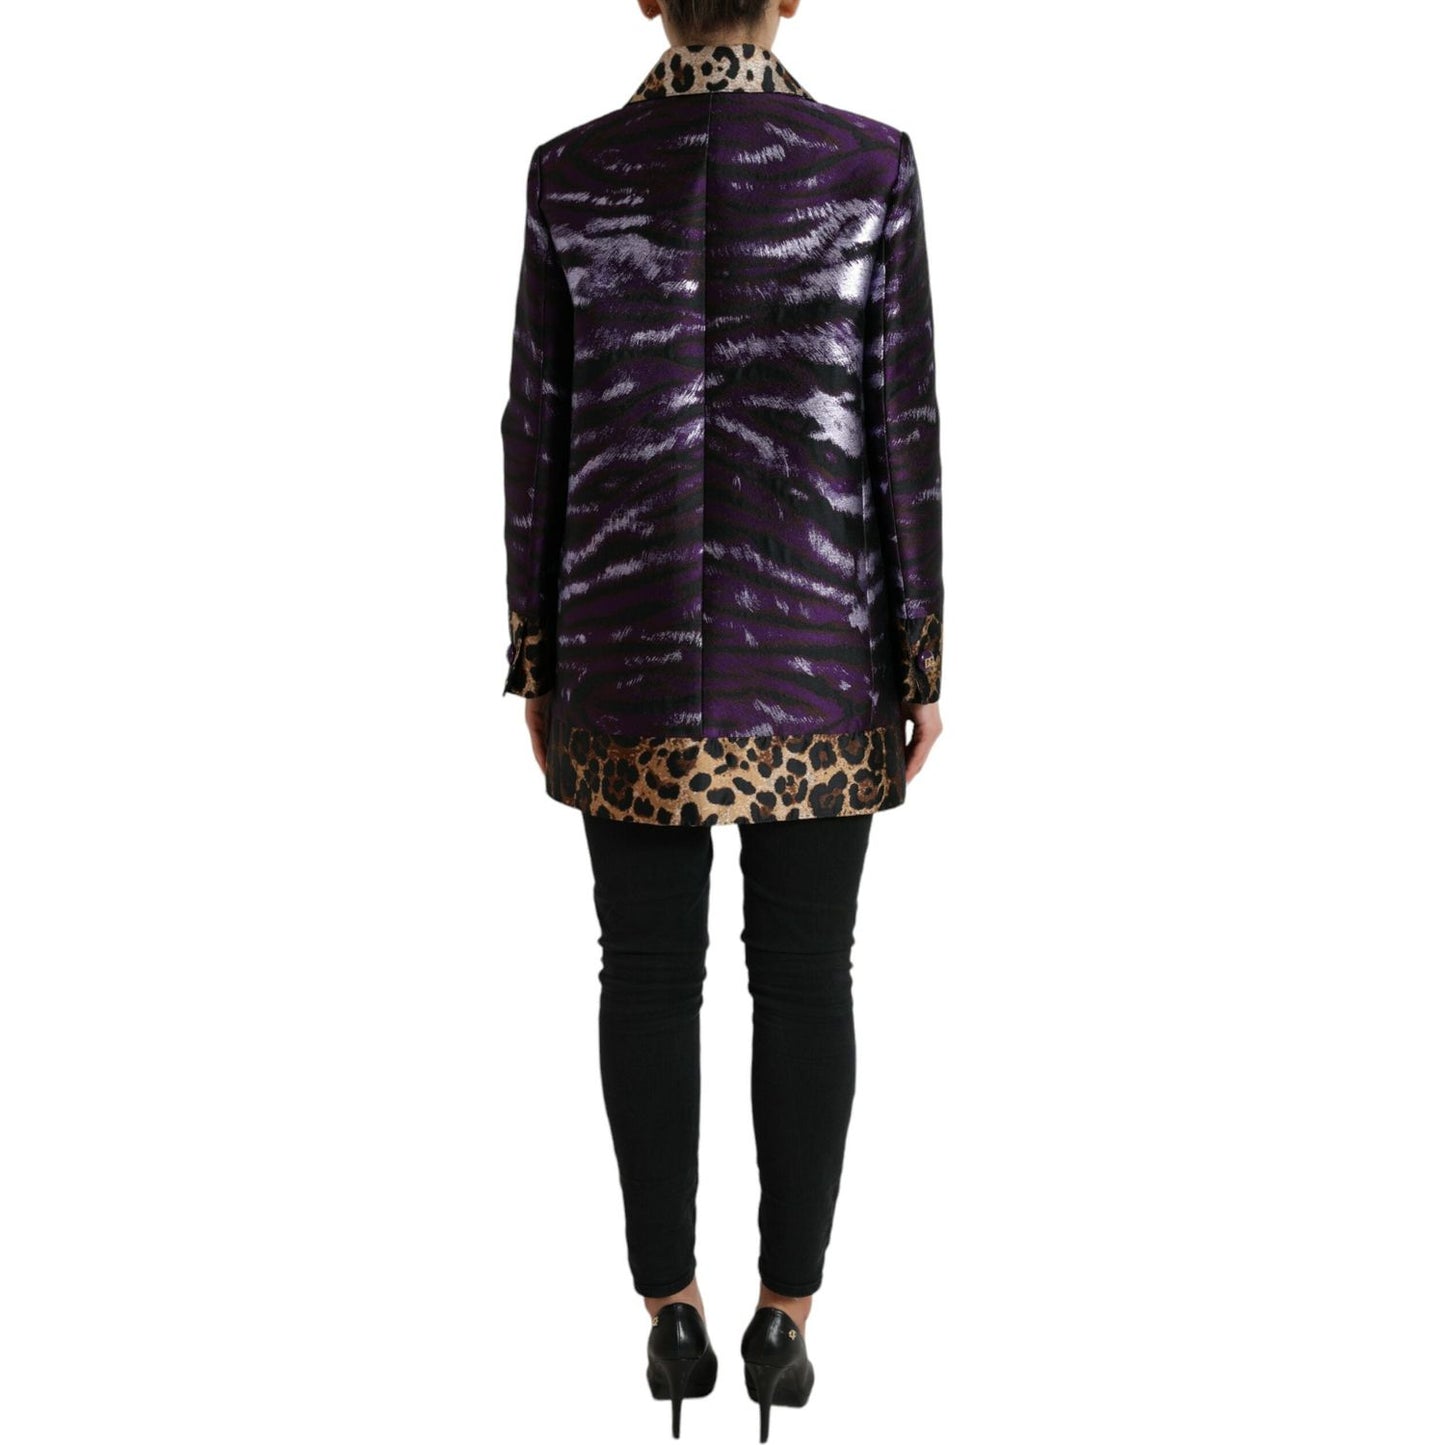 Dolce & Gabbana Exquisite Jacquard Trench With Tiger Motif purple-lame-jacquard-tiger-print-coat-jacket 465A8996-BG-scaled-d7231838-7a4.jpg